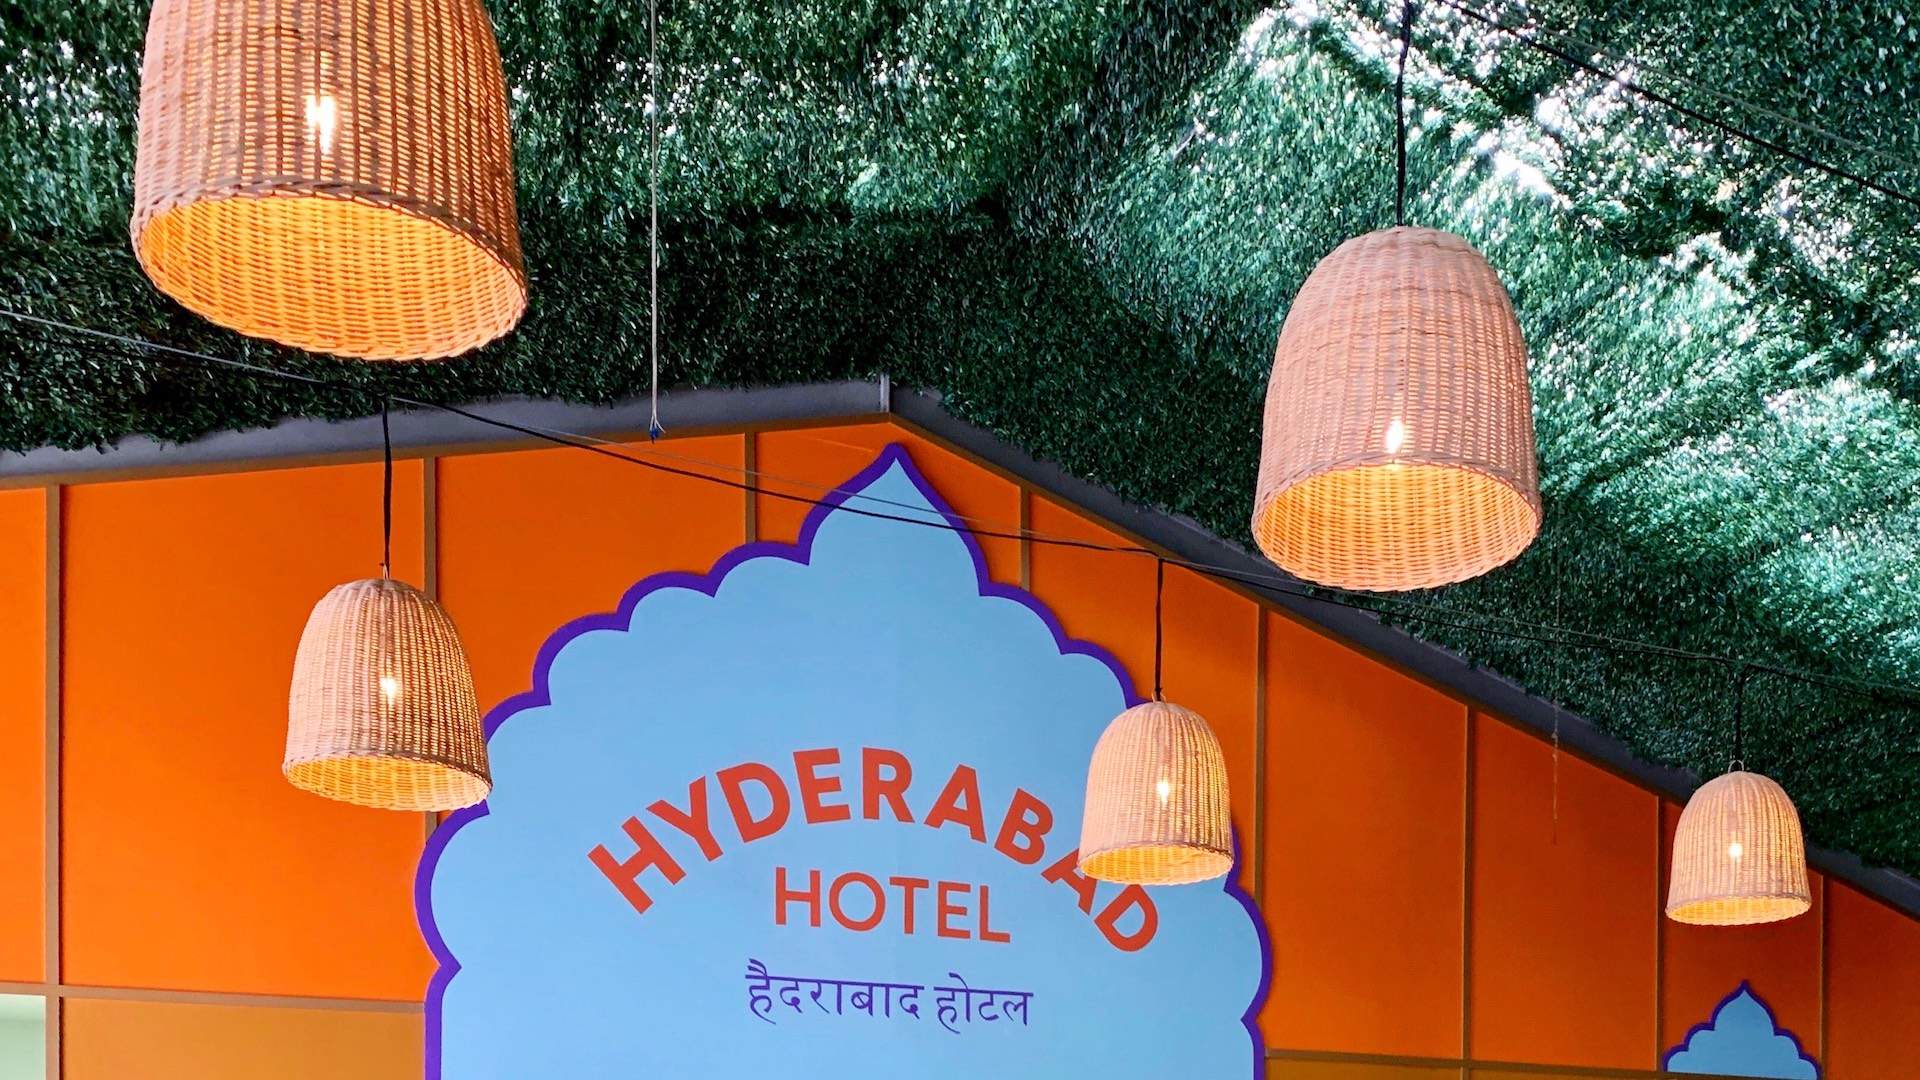 Hyderabad Hotel Is a New Pop-Up Bar From Garage Project and Satya Chai Lounge